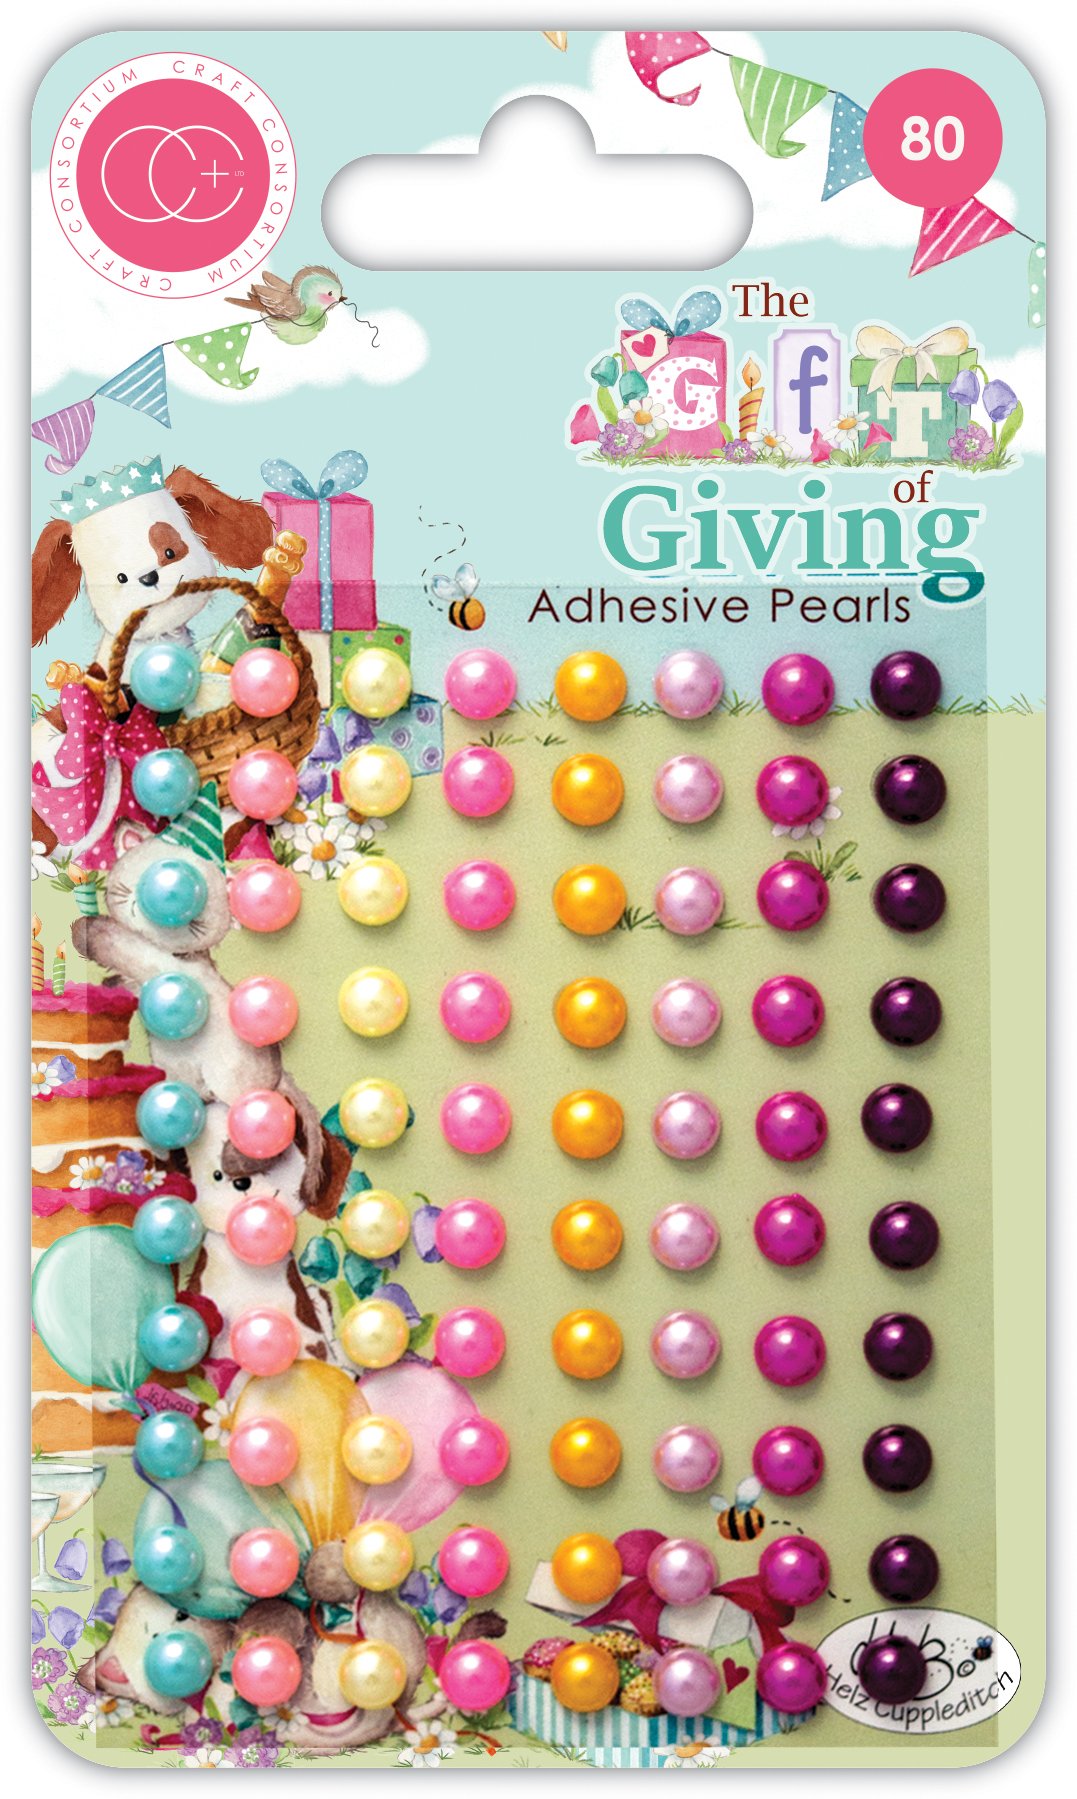 The Gift of Giving Adhesive Pearls